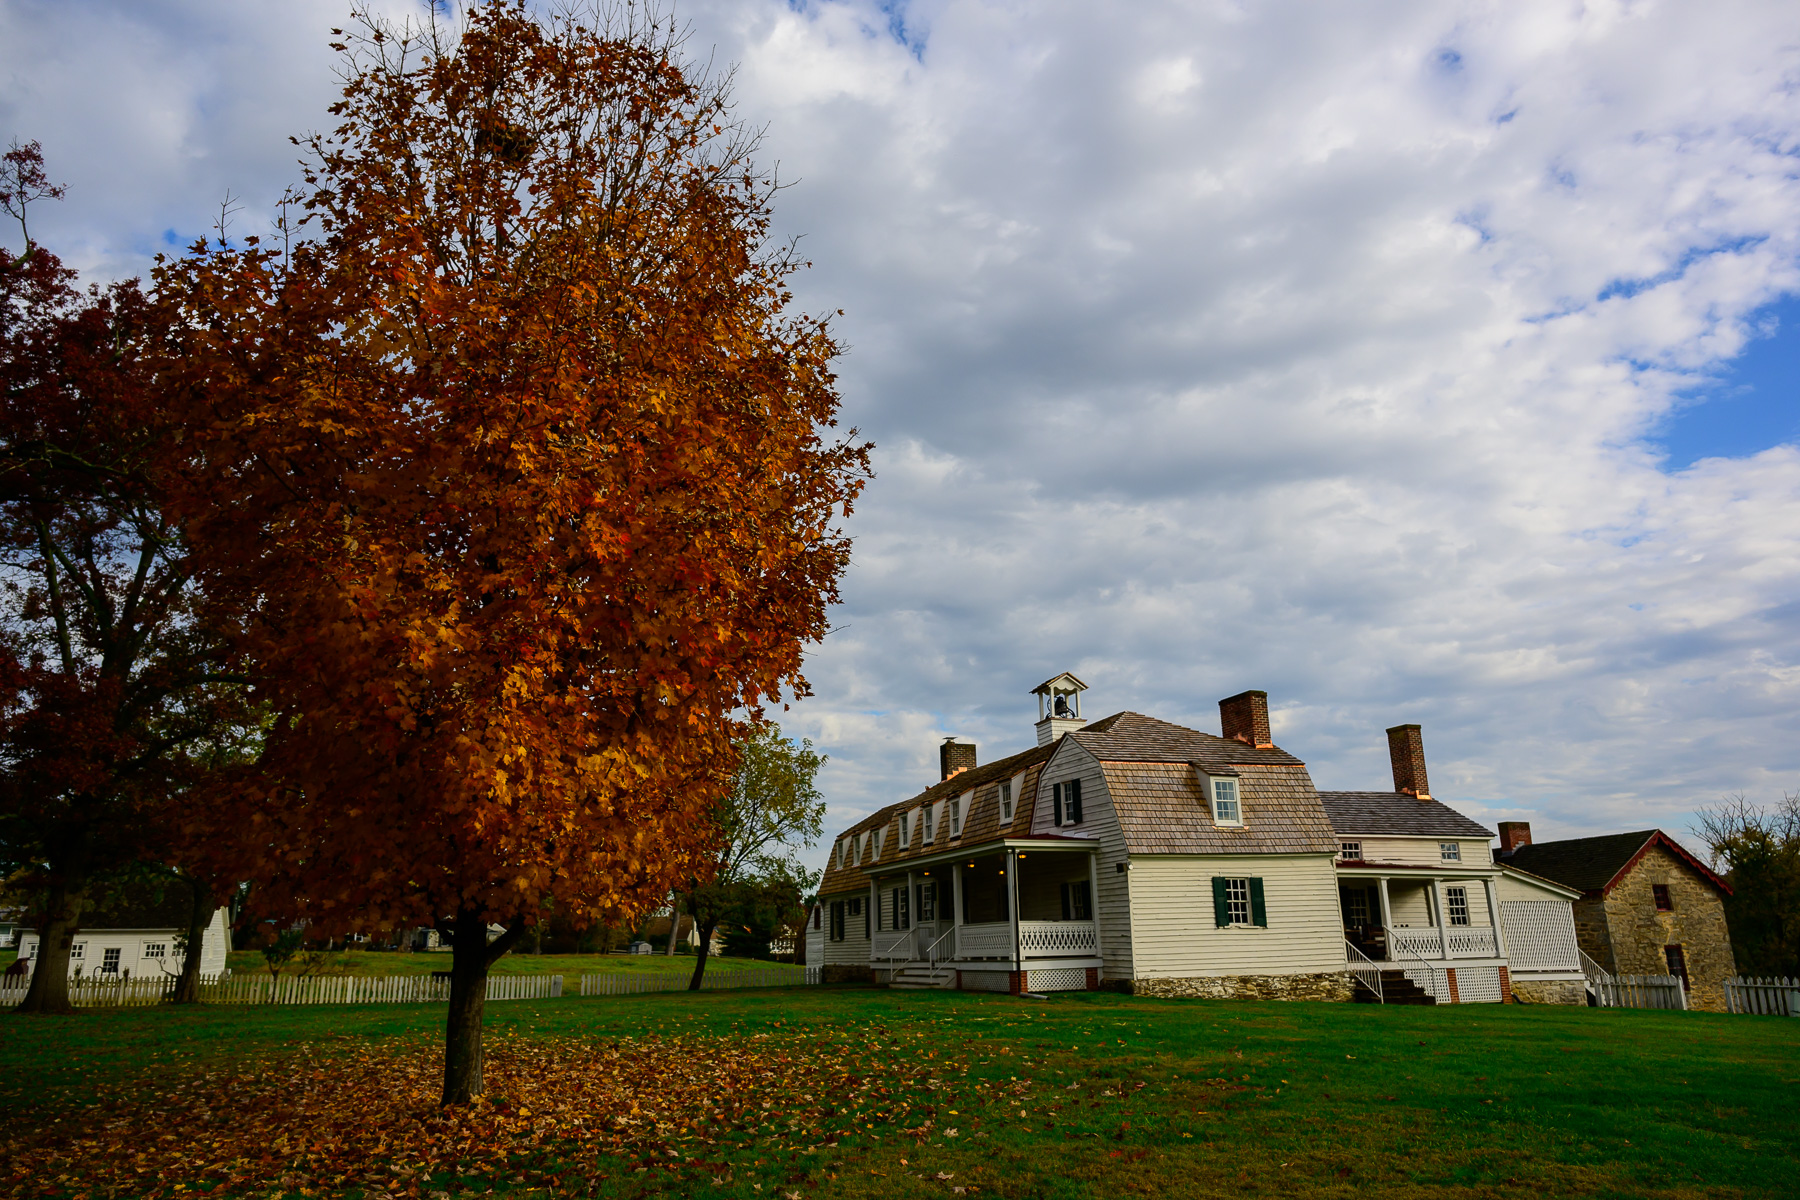 Overseer's house in fall